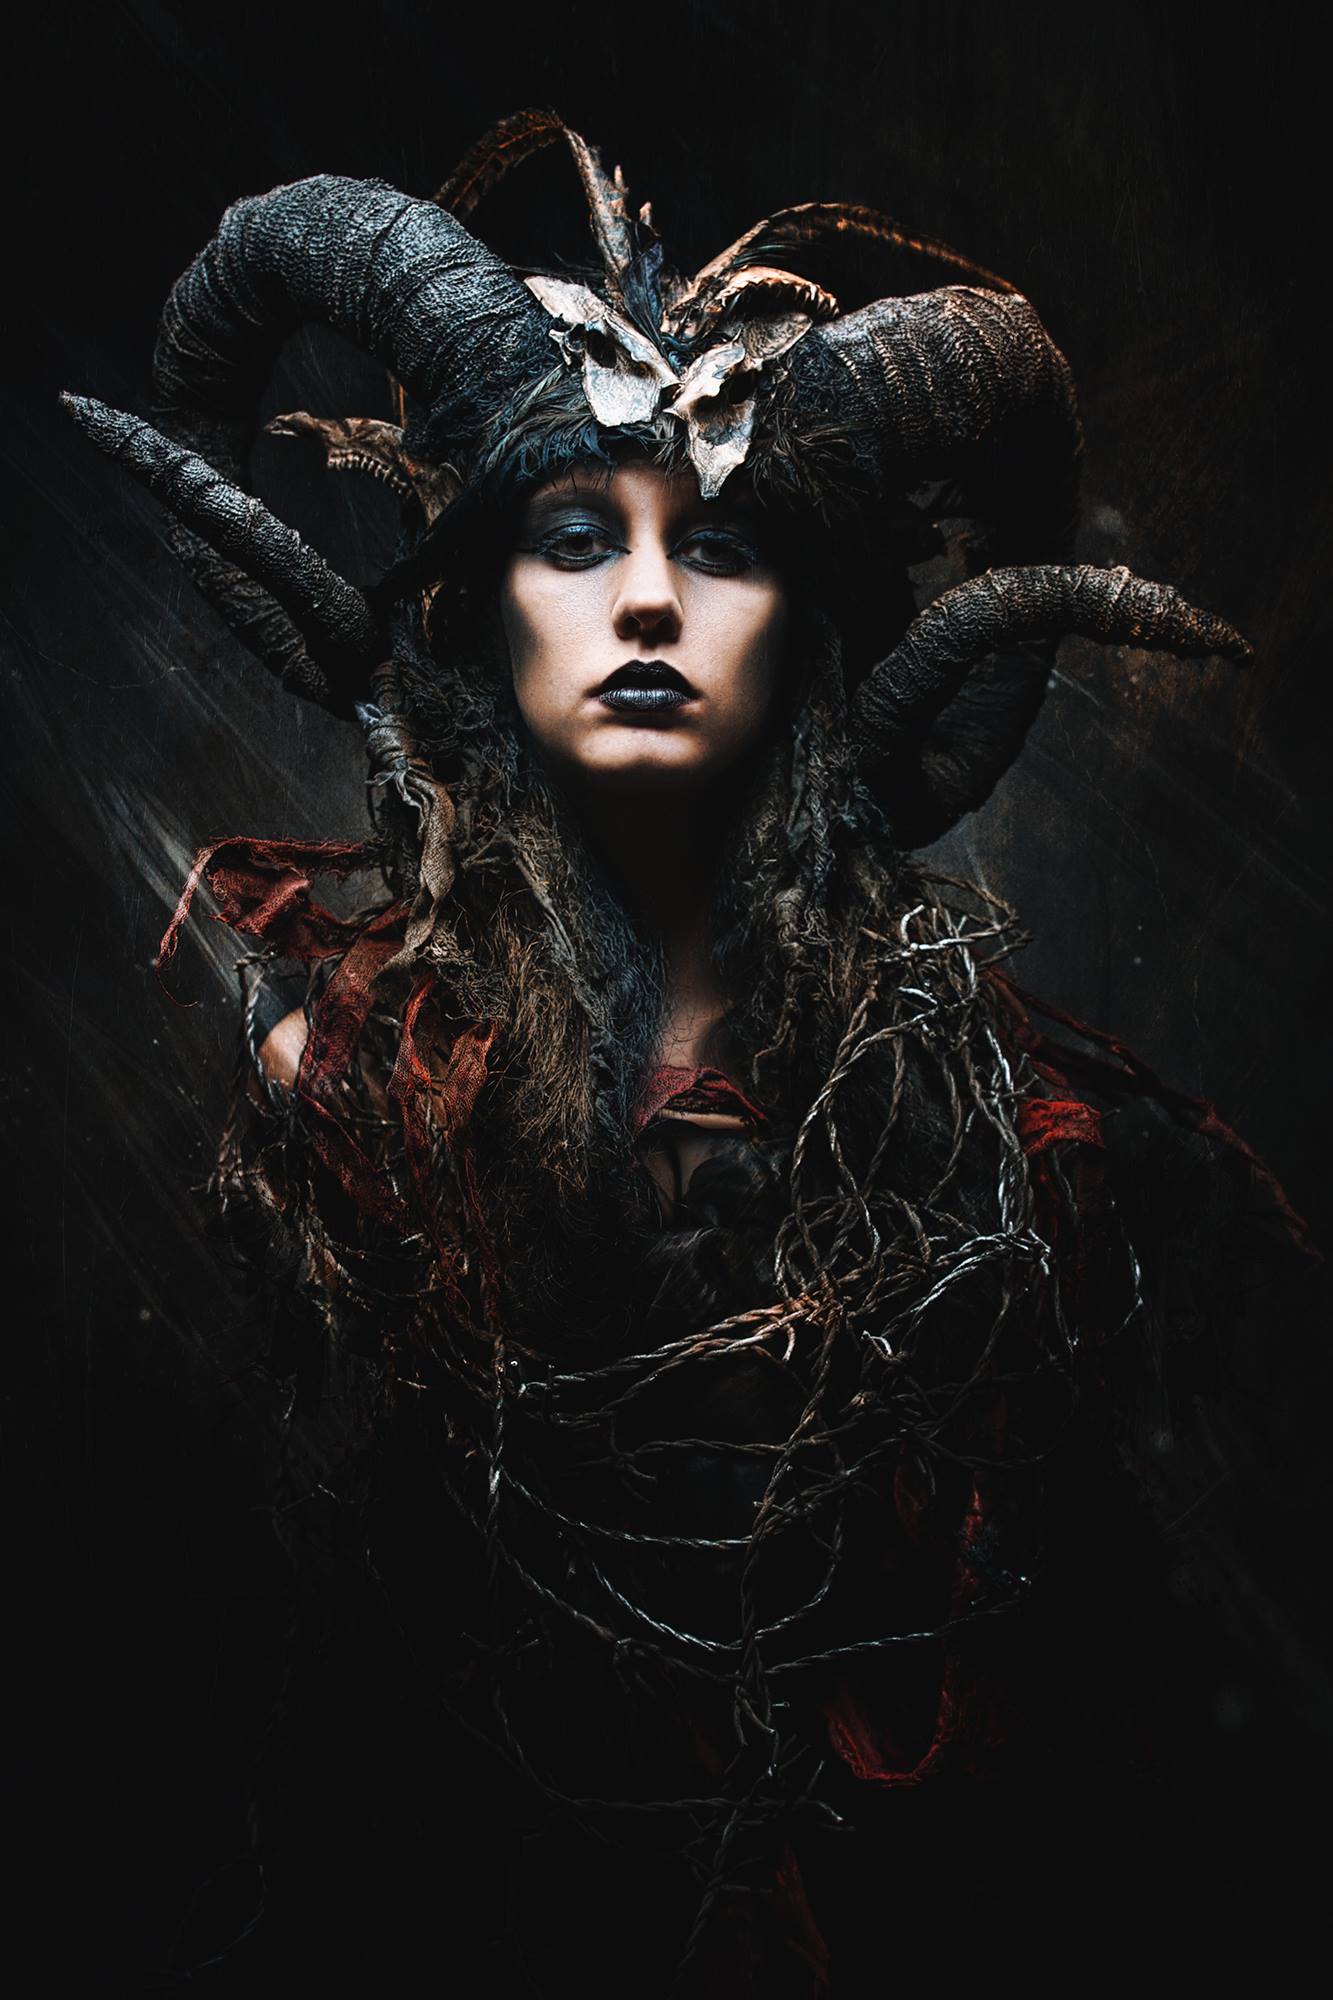 Stefan Gesell Photography manipulation – FROM BEYOND